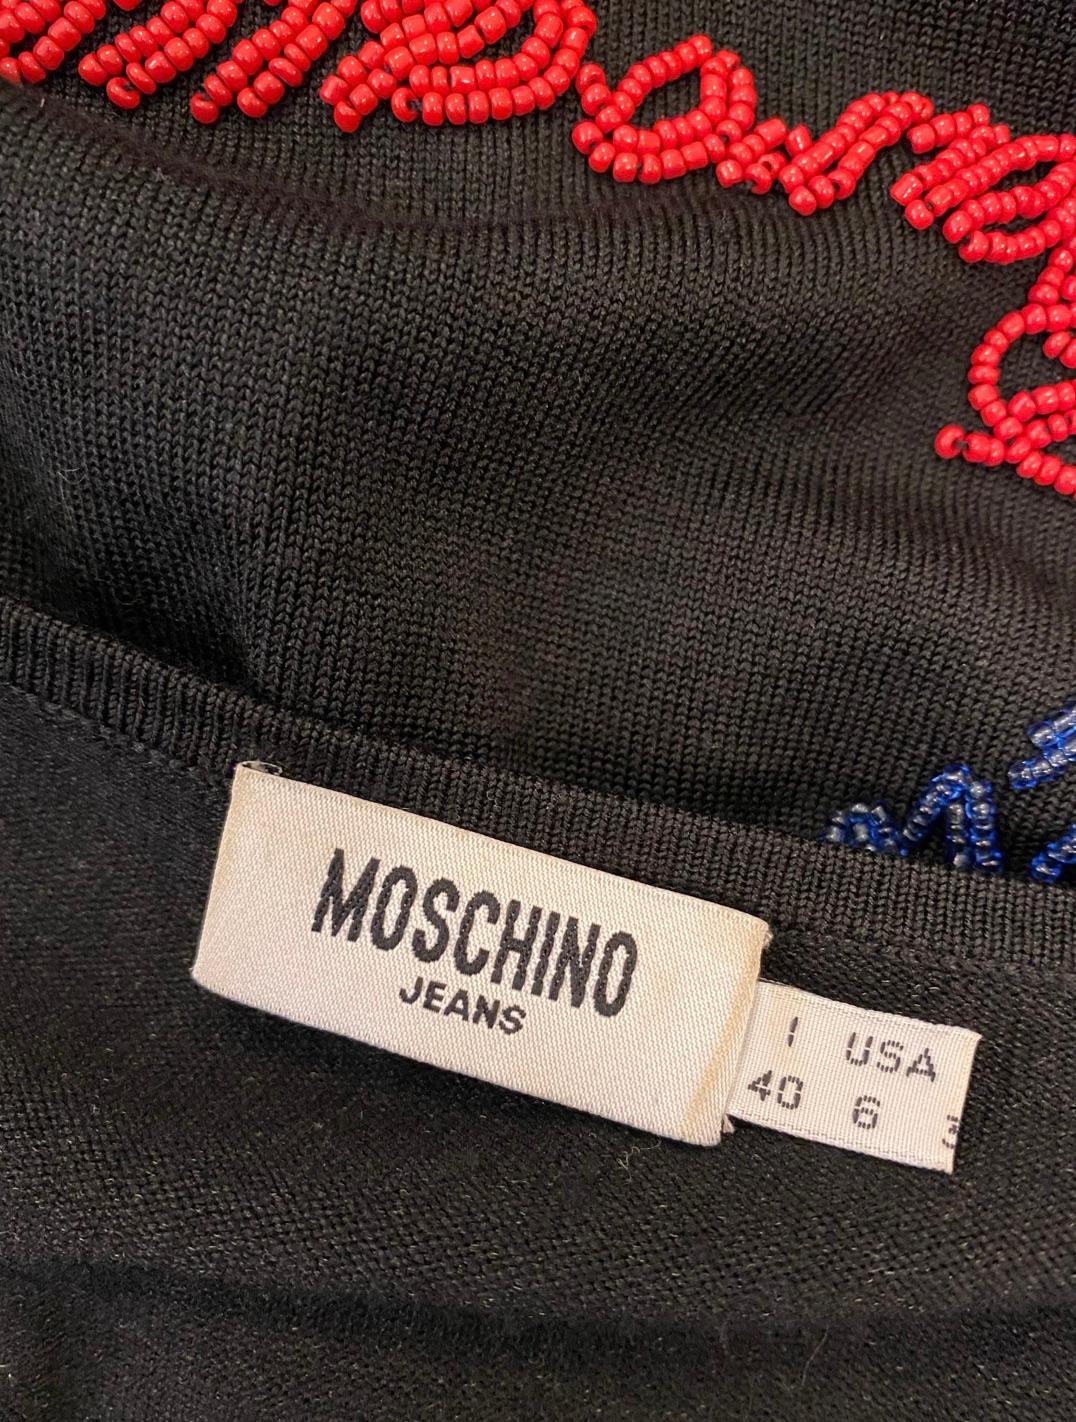 Beaded Silk Moschino Jeans Top For Sale 1